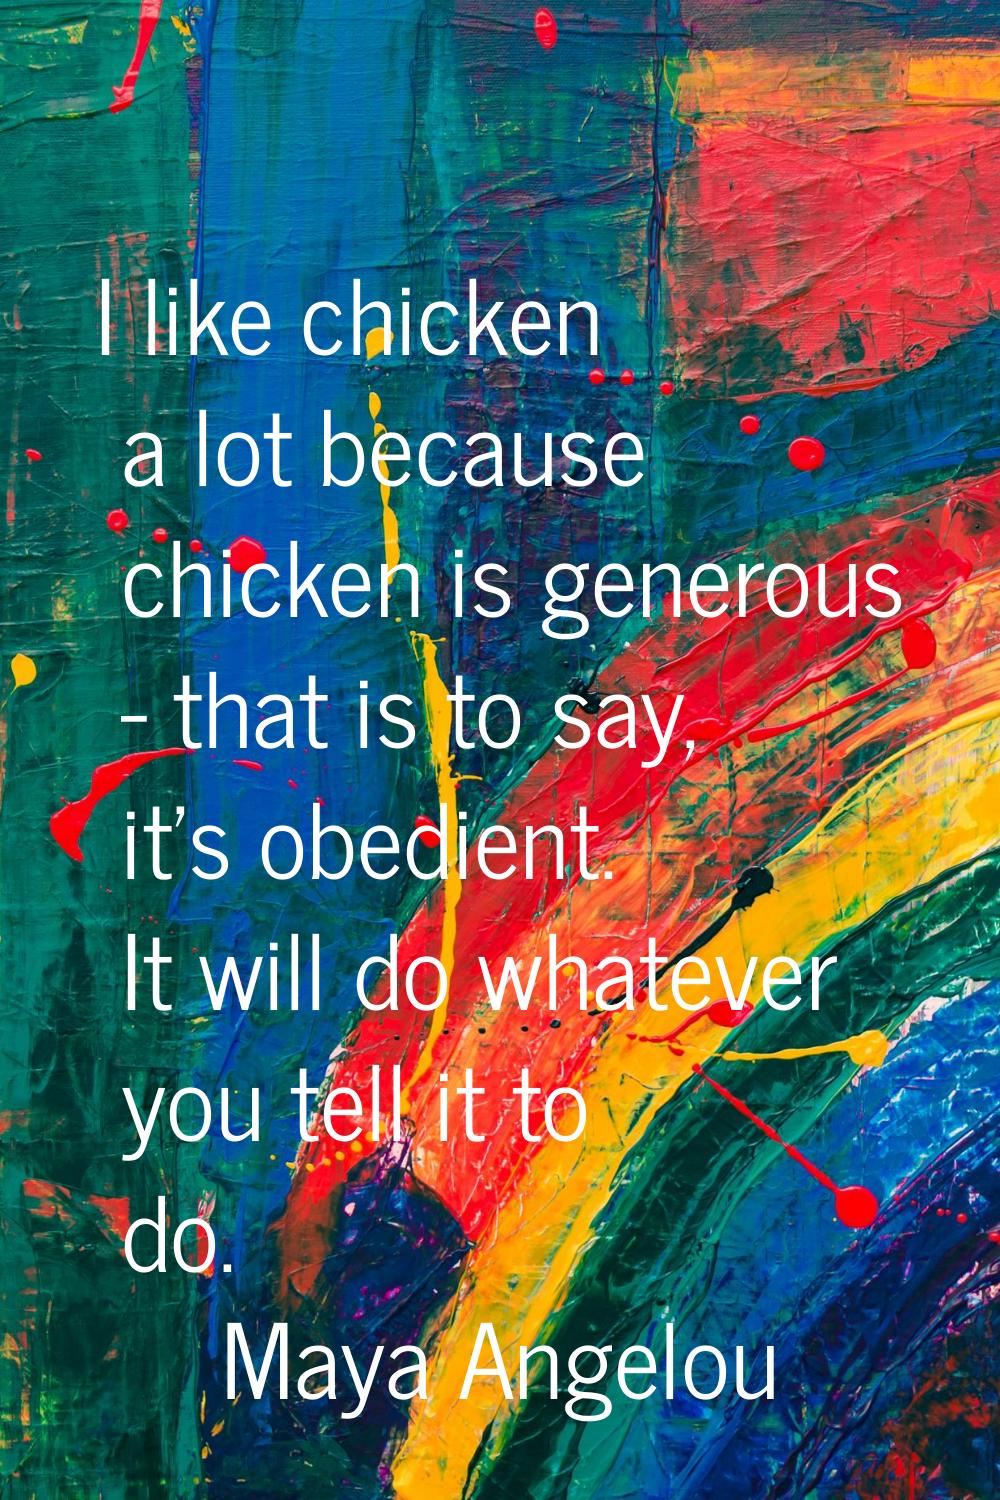 I like chicken a lot because chicken is generous - that is to say, it's obedient. It will do whatev